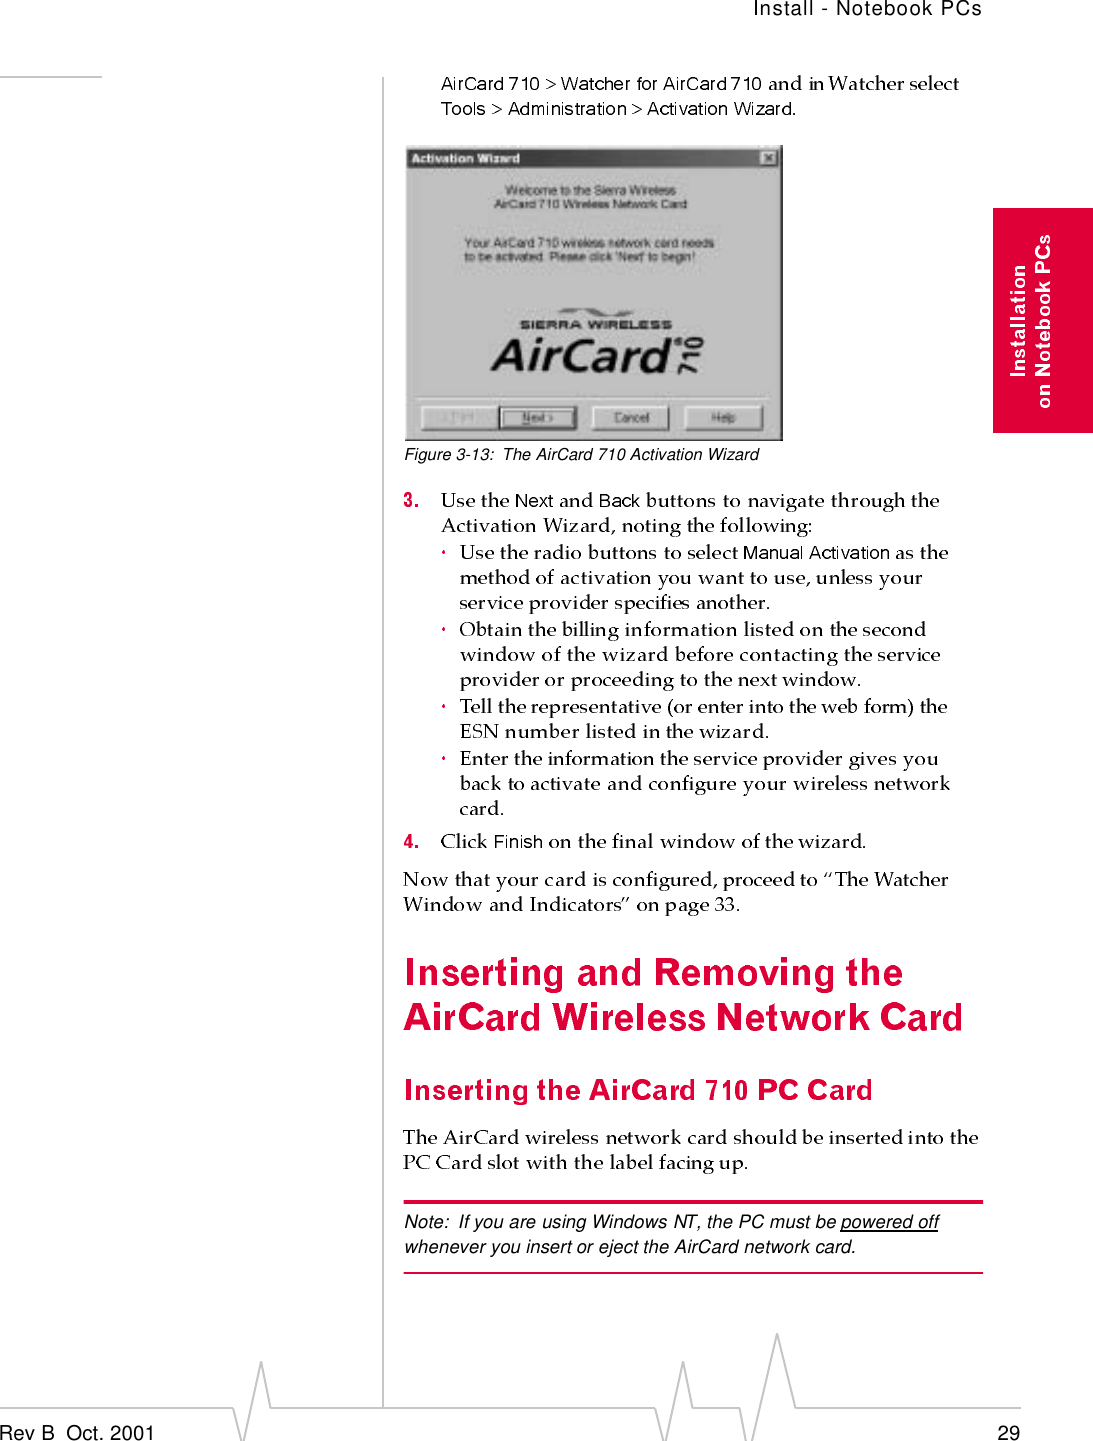 Install - Notebook PCsRev B  Oct. 2001 29Figure 3-13: The AirCard 710 Activation WizardNote: If you are using Windows NT, the PC must be powered off whenever you insert or eject the AirCard network card.